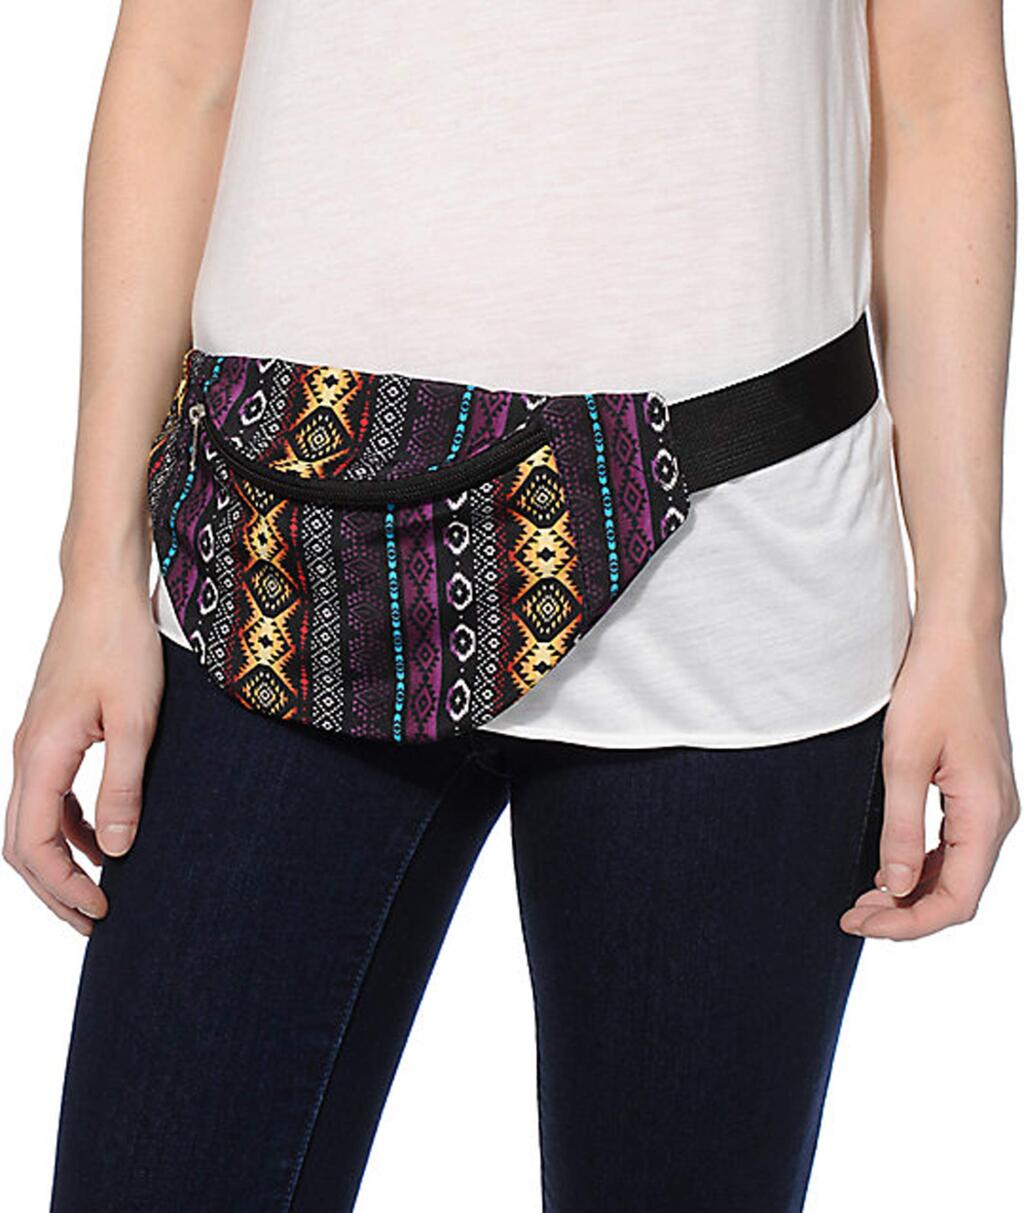 Embrace the fanny pack, like this one from Zumiez. It's a convenient place to hold your phone and wallet, and won't hinder your awesome dance moves.